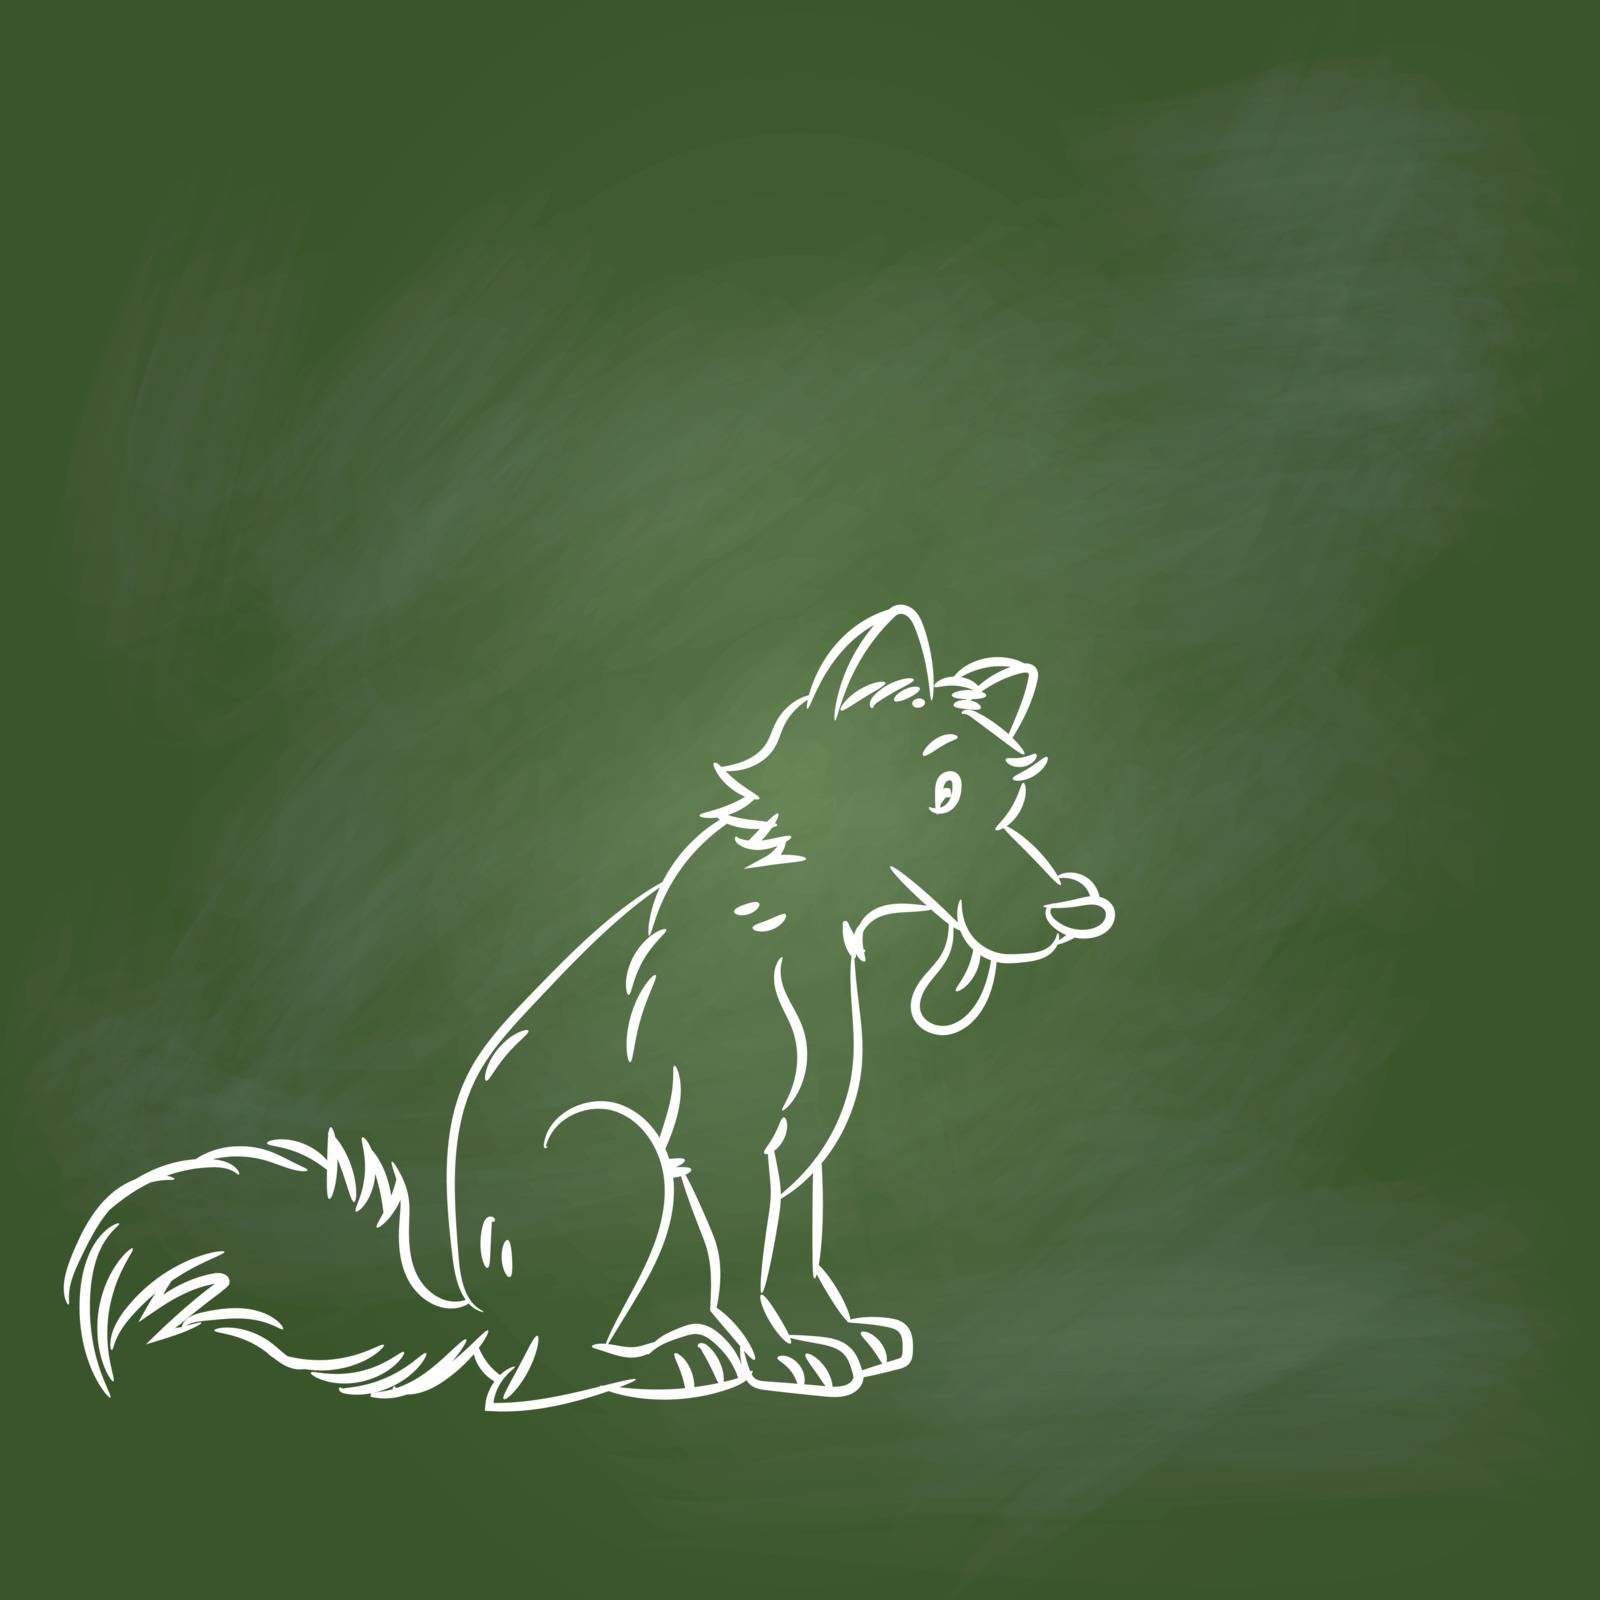 Hand drawing Dog Cartoon on textured green board. for Education Concept, Vector Illustration, drawing with chalk on greenboard.